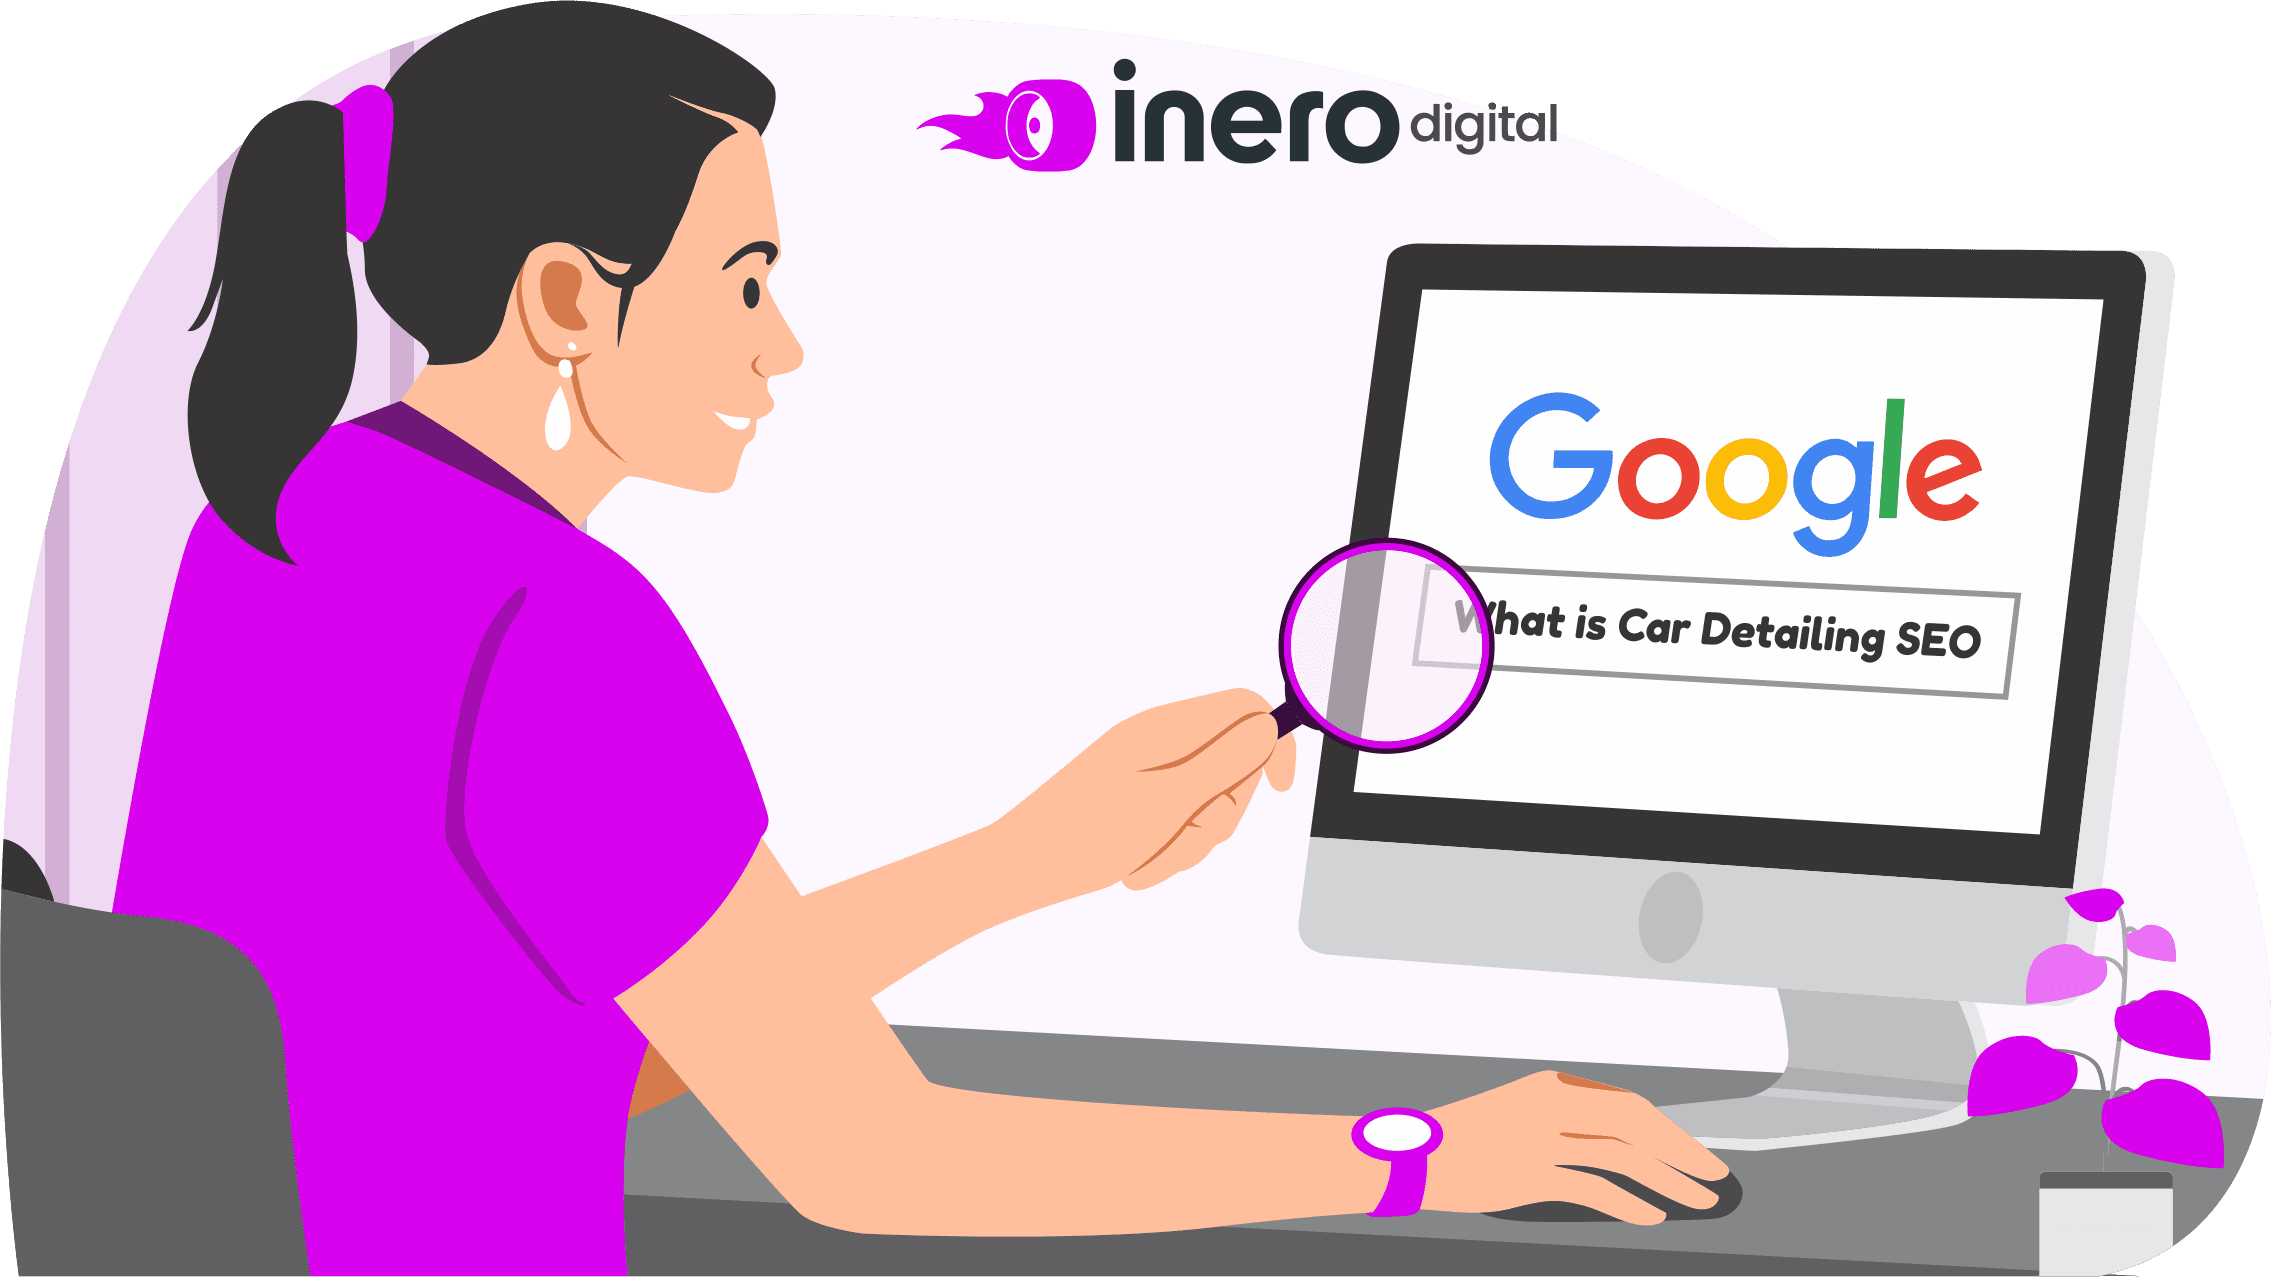 What is Car Detailing SEO?